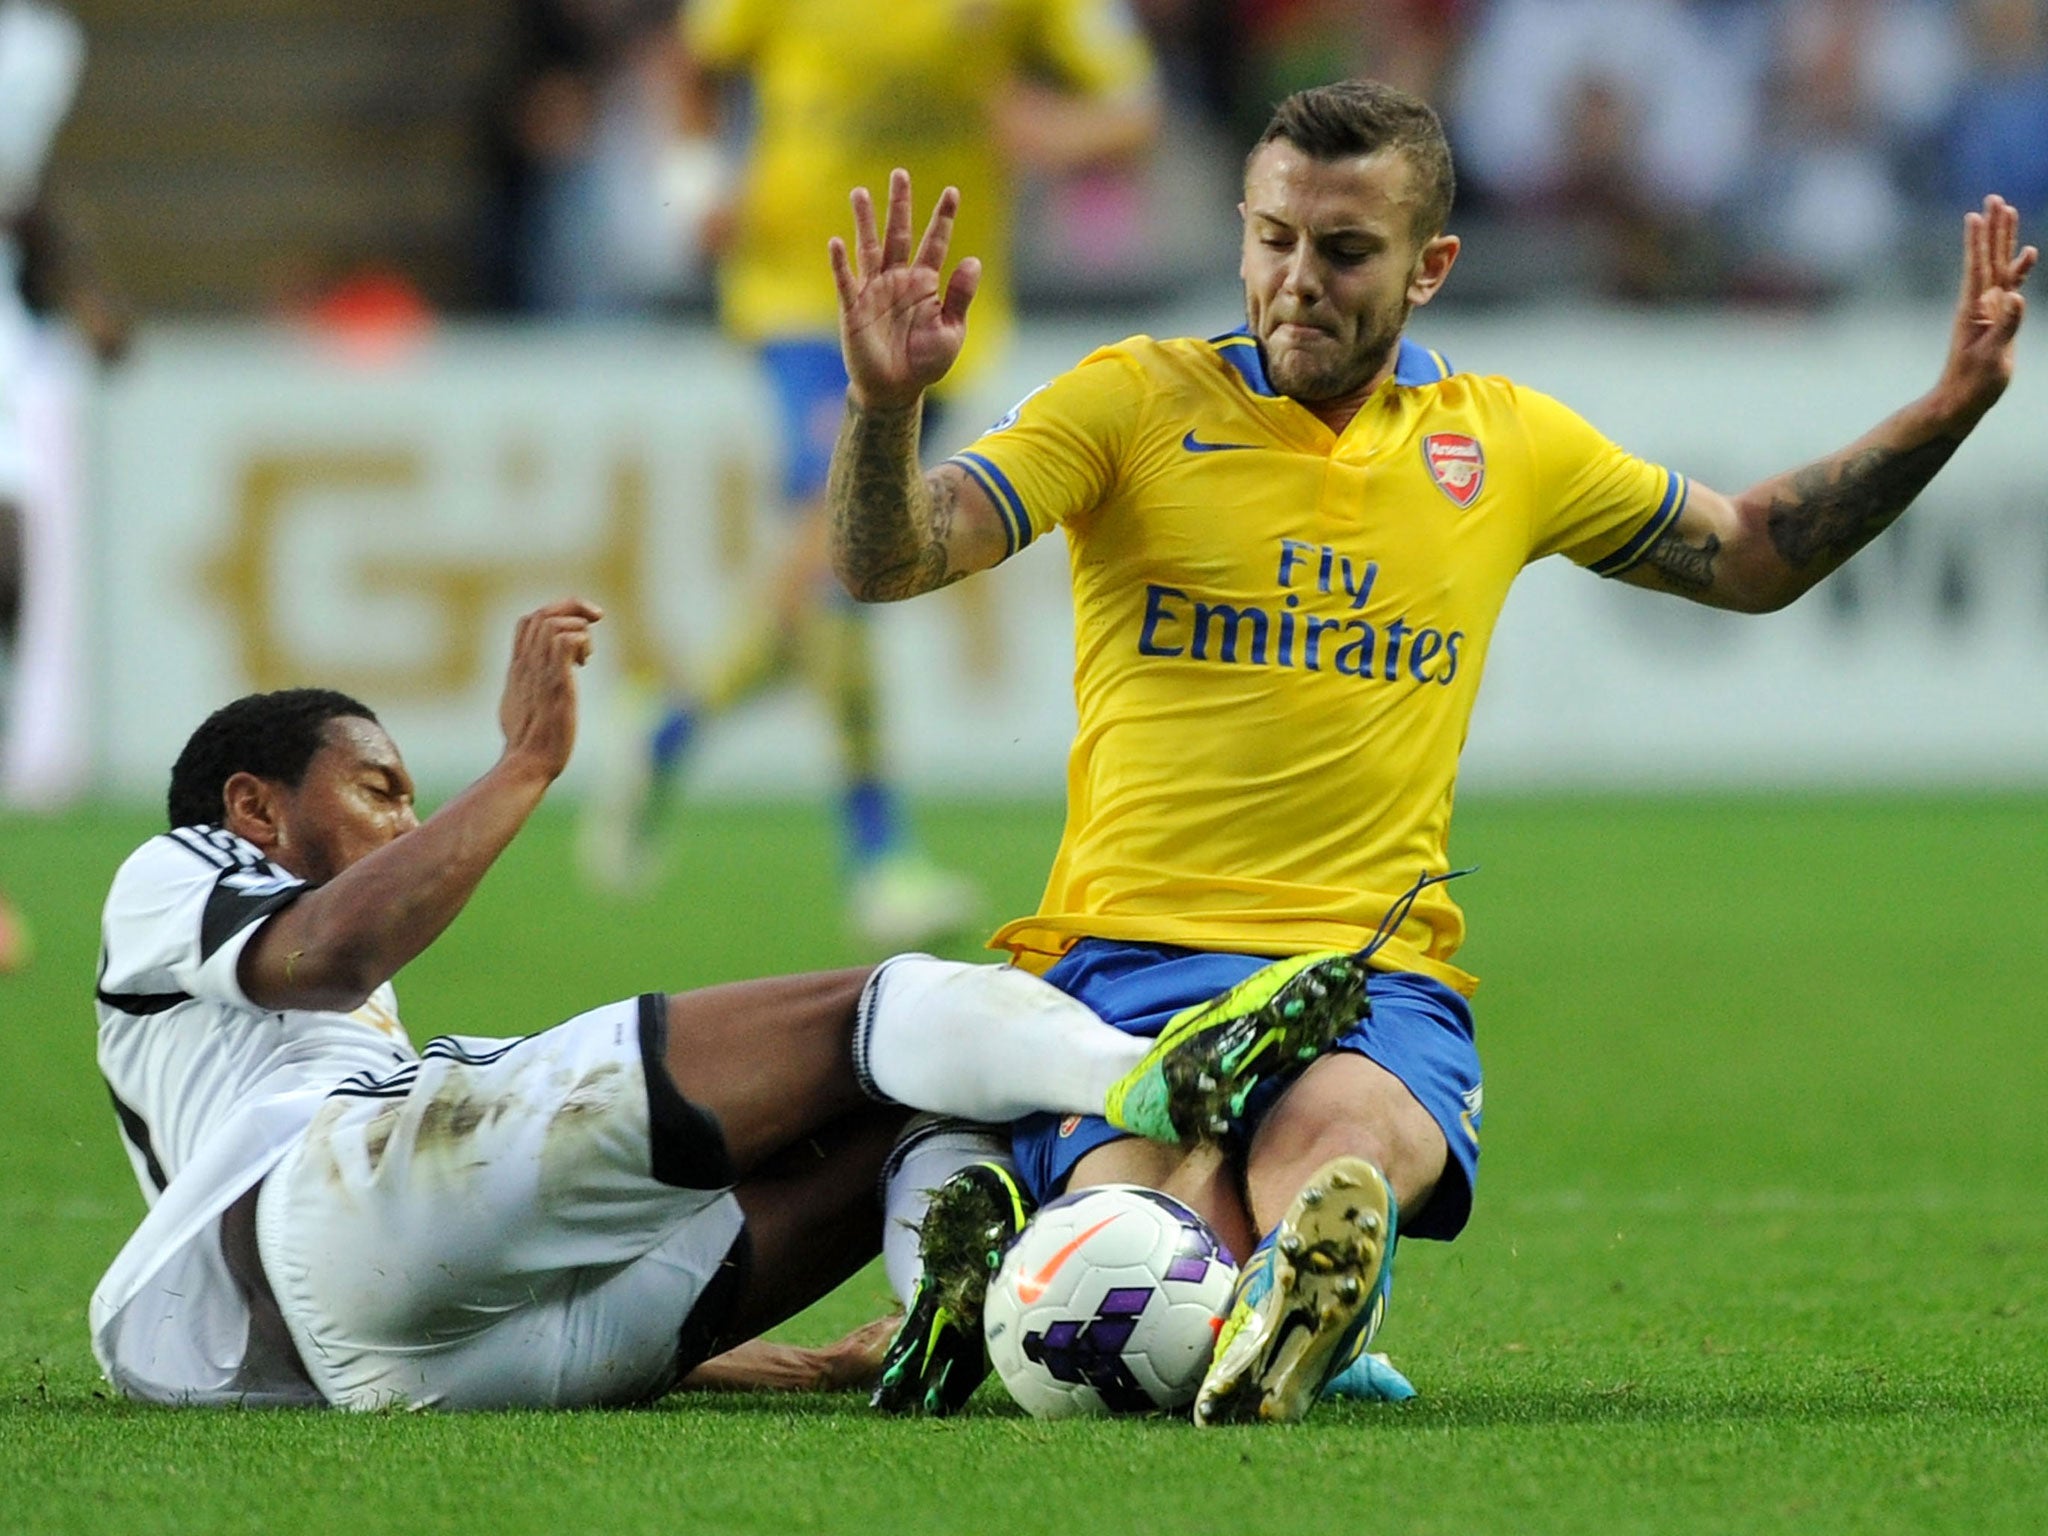 Jack Wilshere dives in on Jonathan De Guzman during Arsenal's clash with Swansea